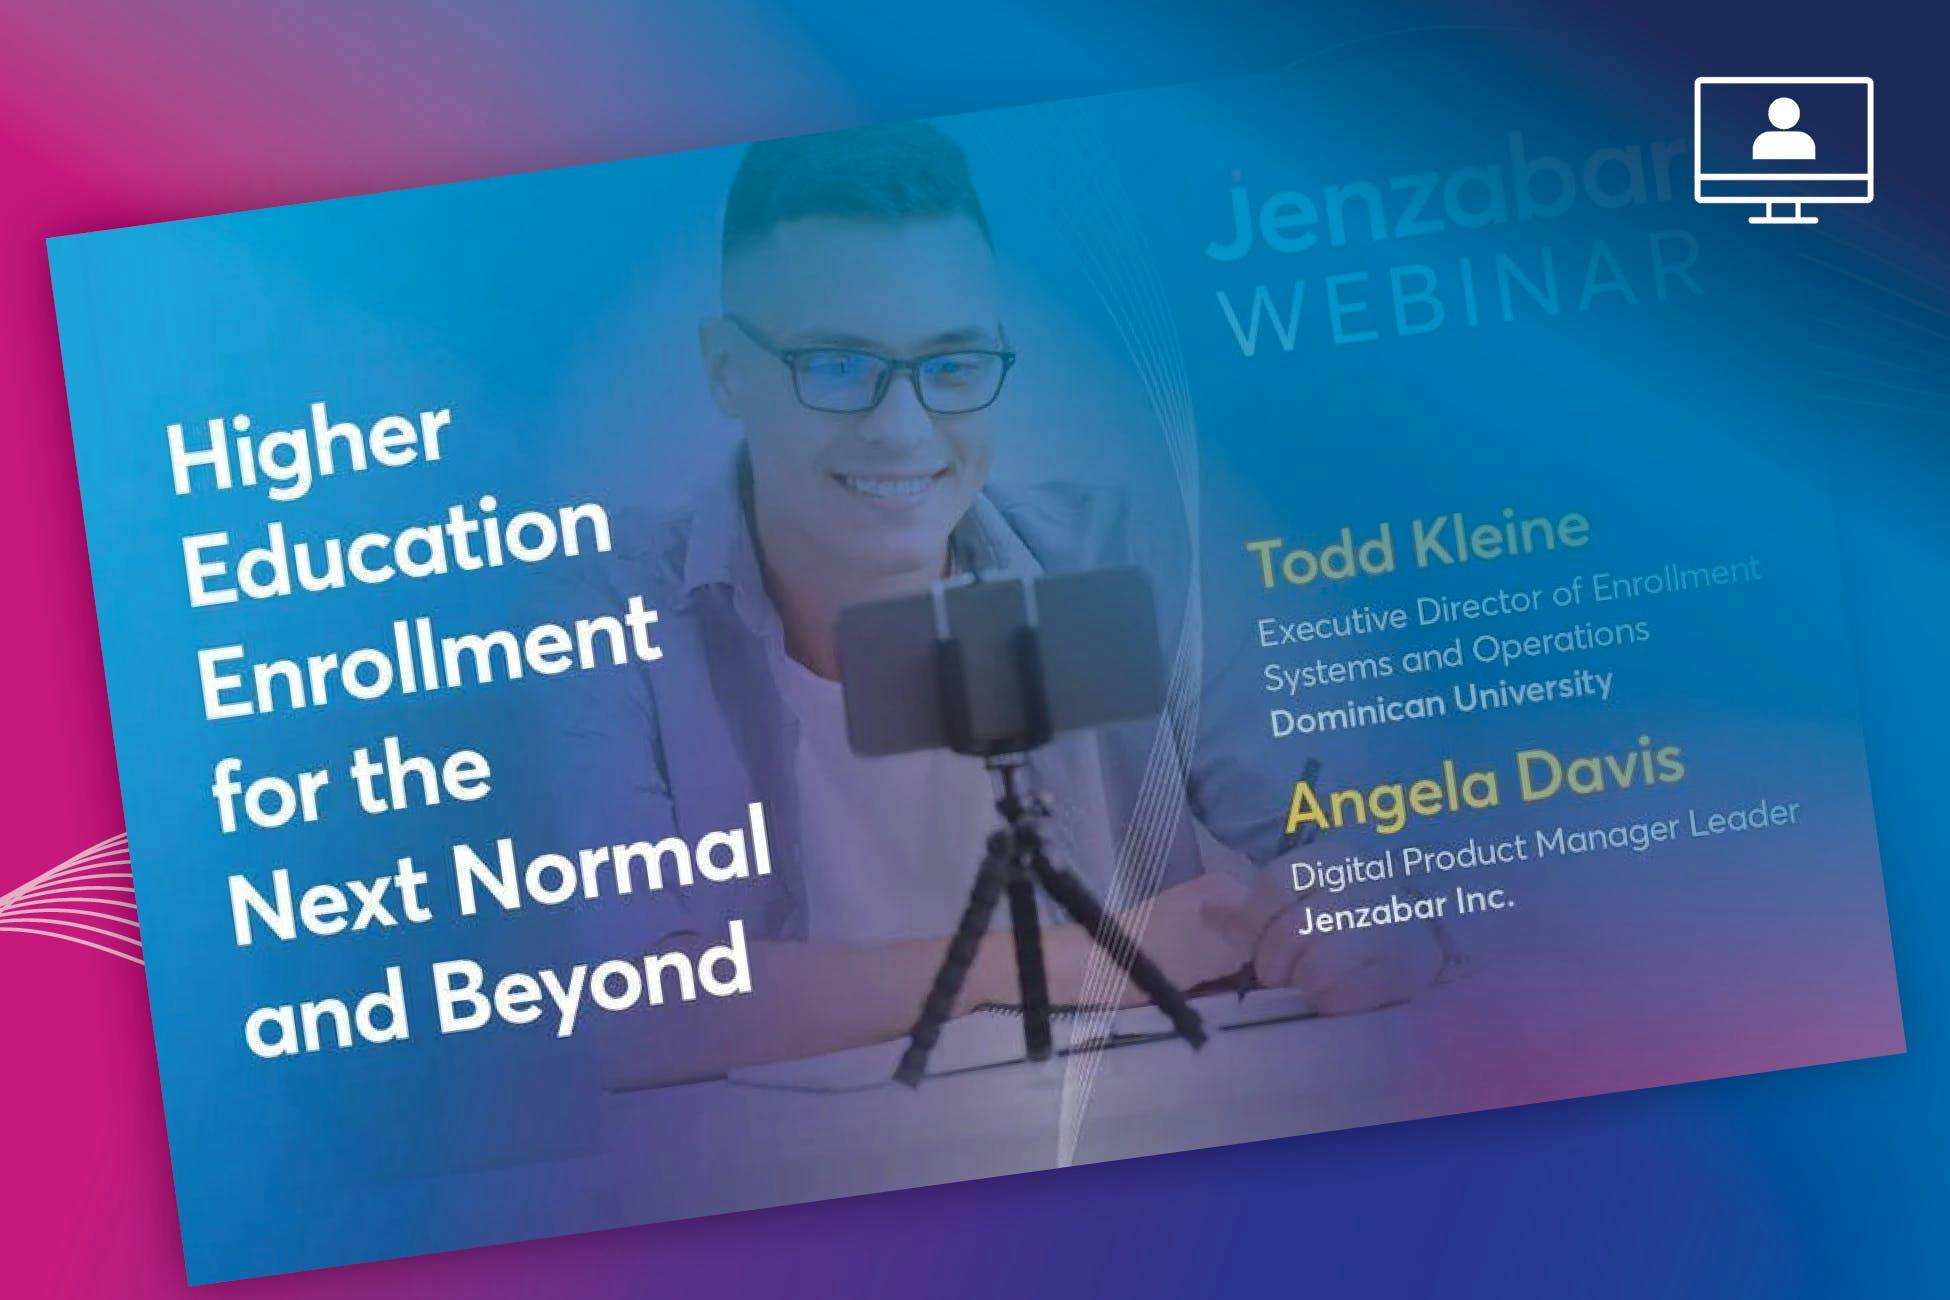 Webinar: Higher Education Enrollment for the Next Normal and Beyond